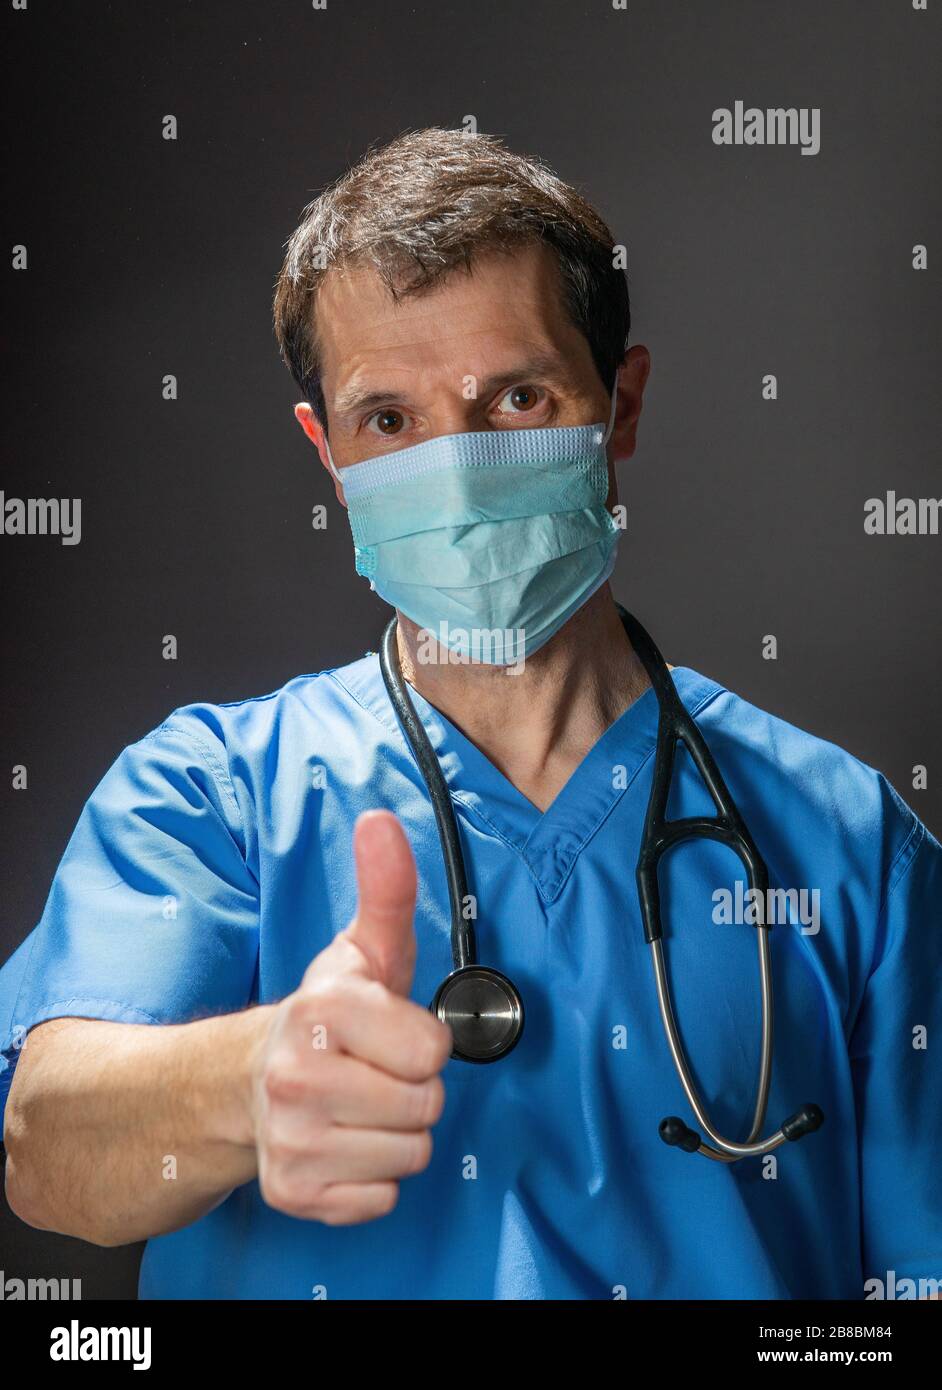 Doctor doing a thumbs up hand gesture, wearing blue scrubs, surgical face mask and stethoscope, against a dark background. Stock Photo